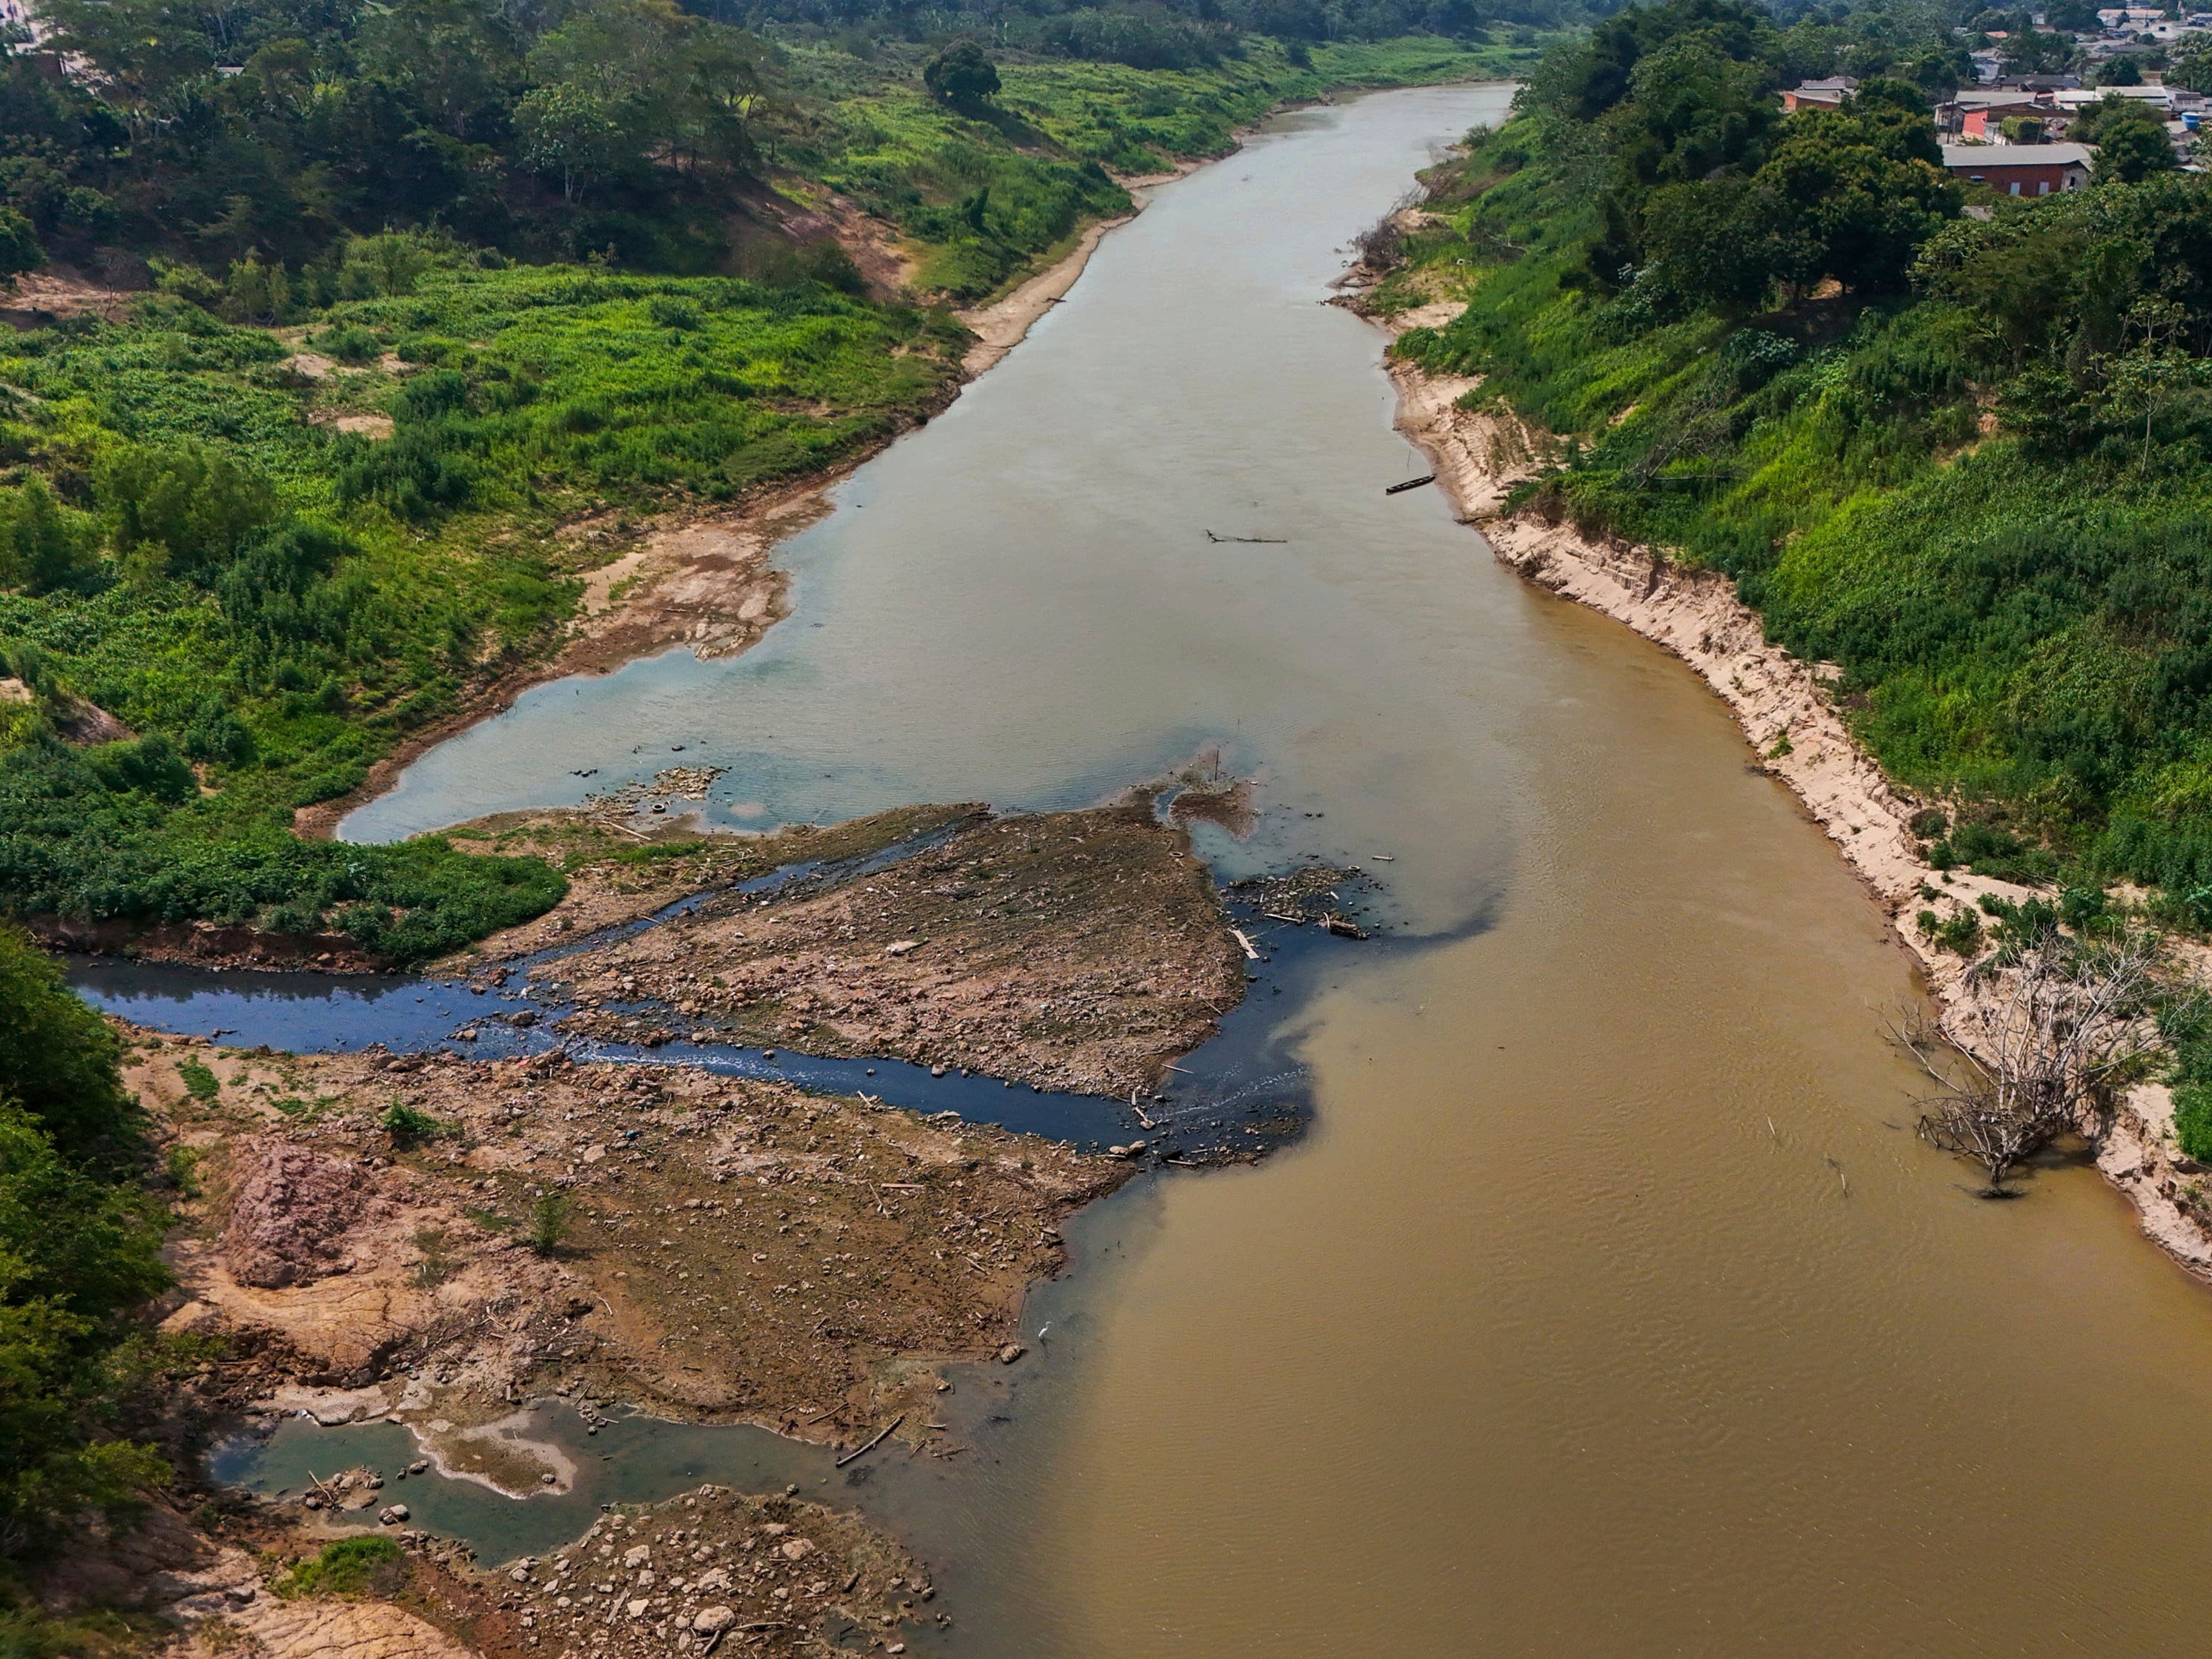 Severe drought returns to the Amazon earlier than expected